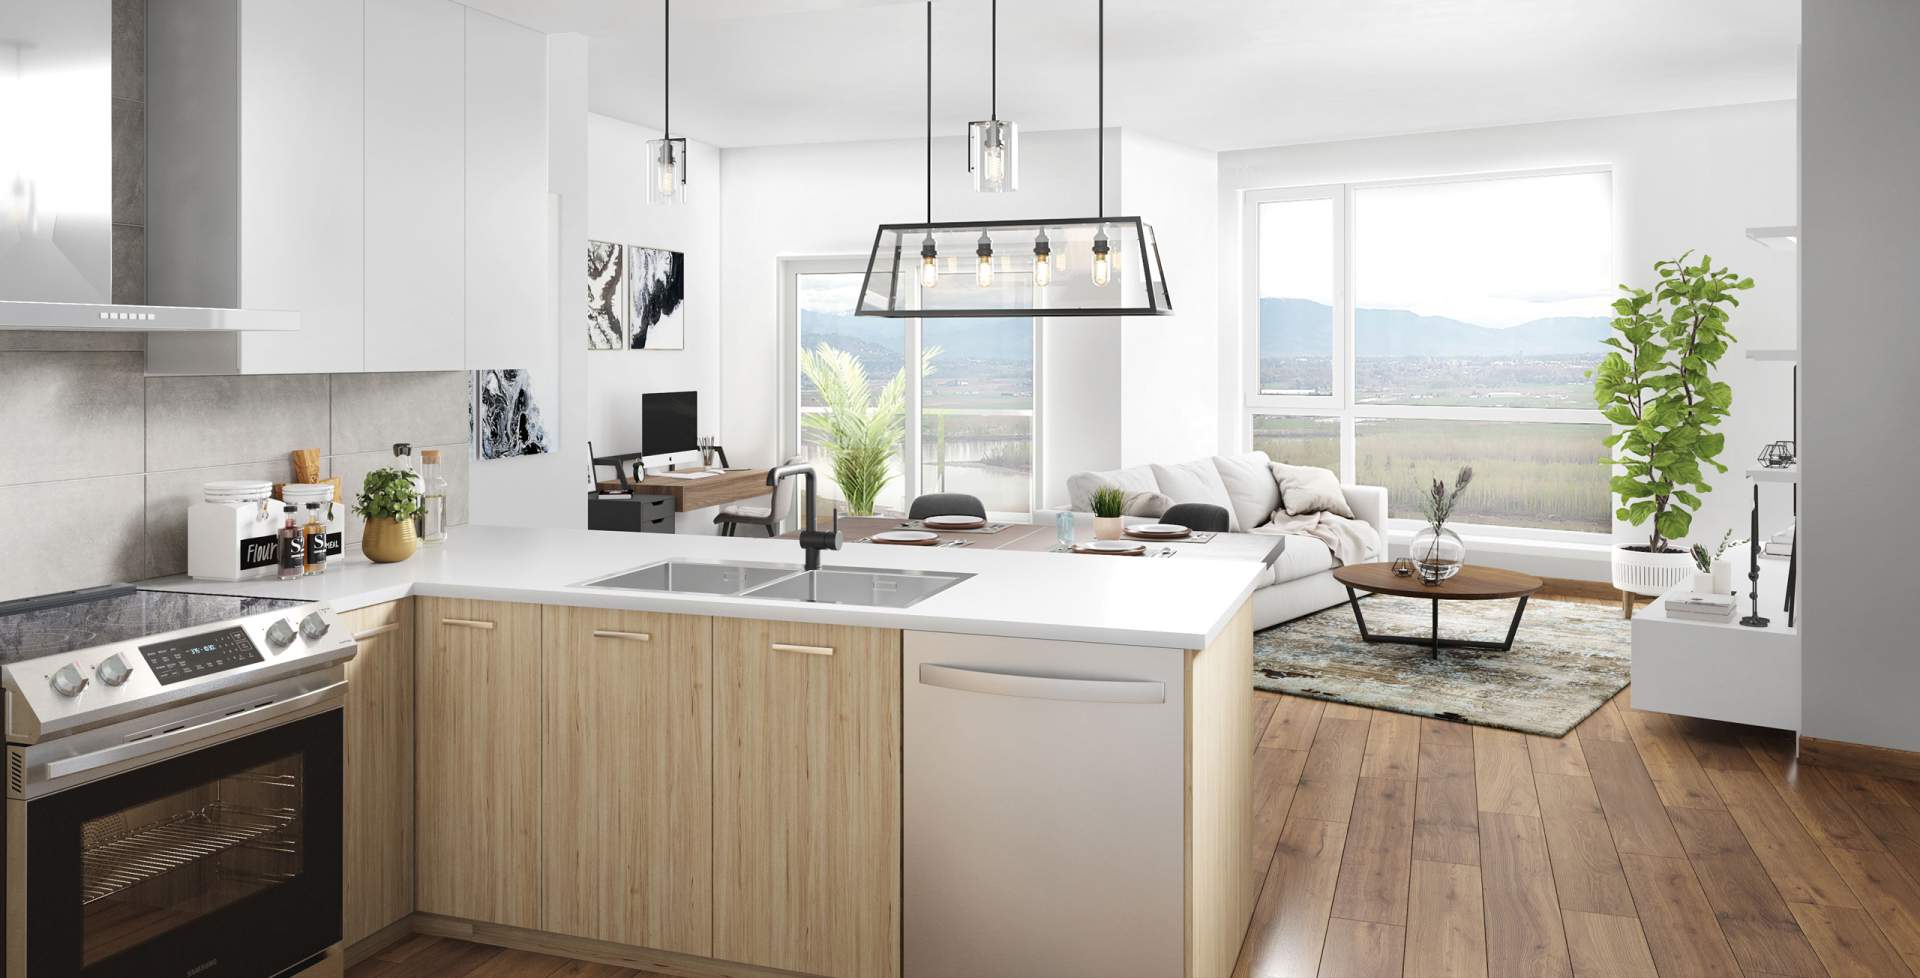 Interiors by Portico Design Group are inspired by the Fraser River.